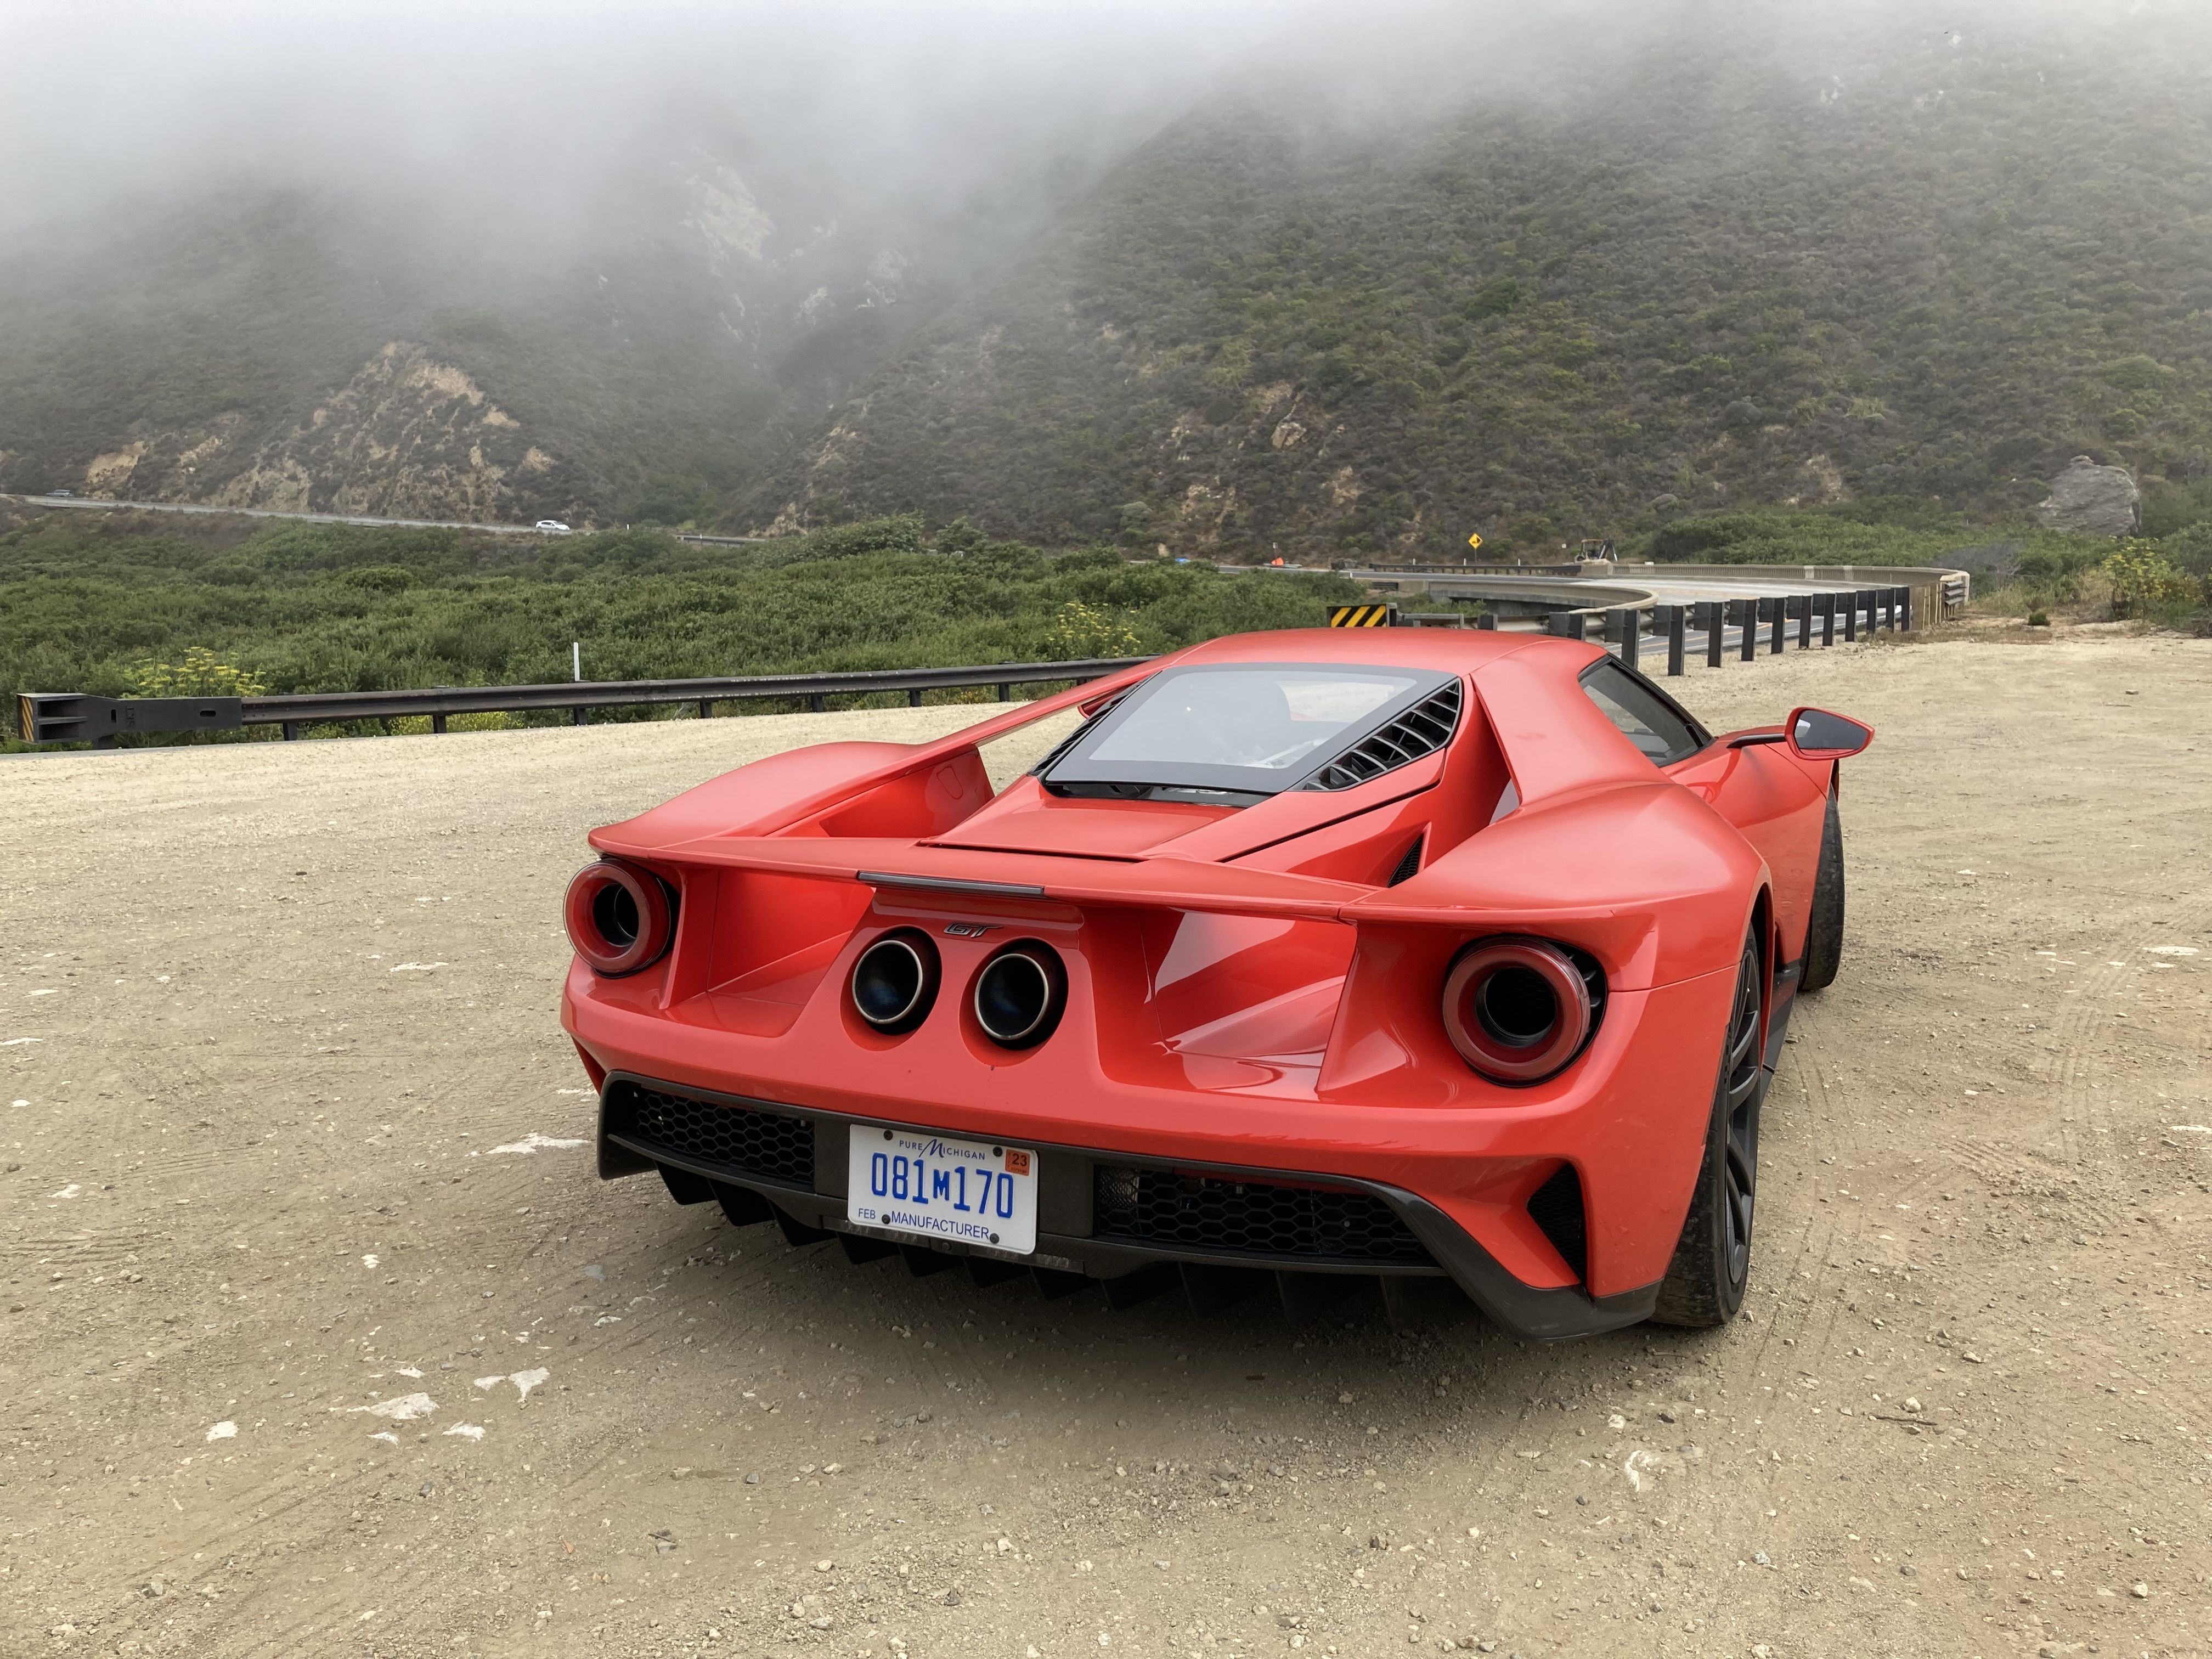 Ford GT Supercar, Ford Sports Cars